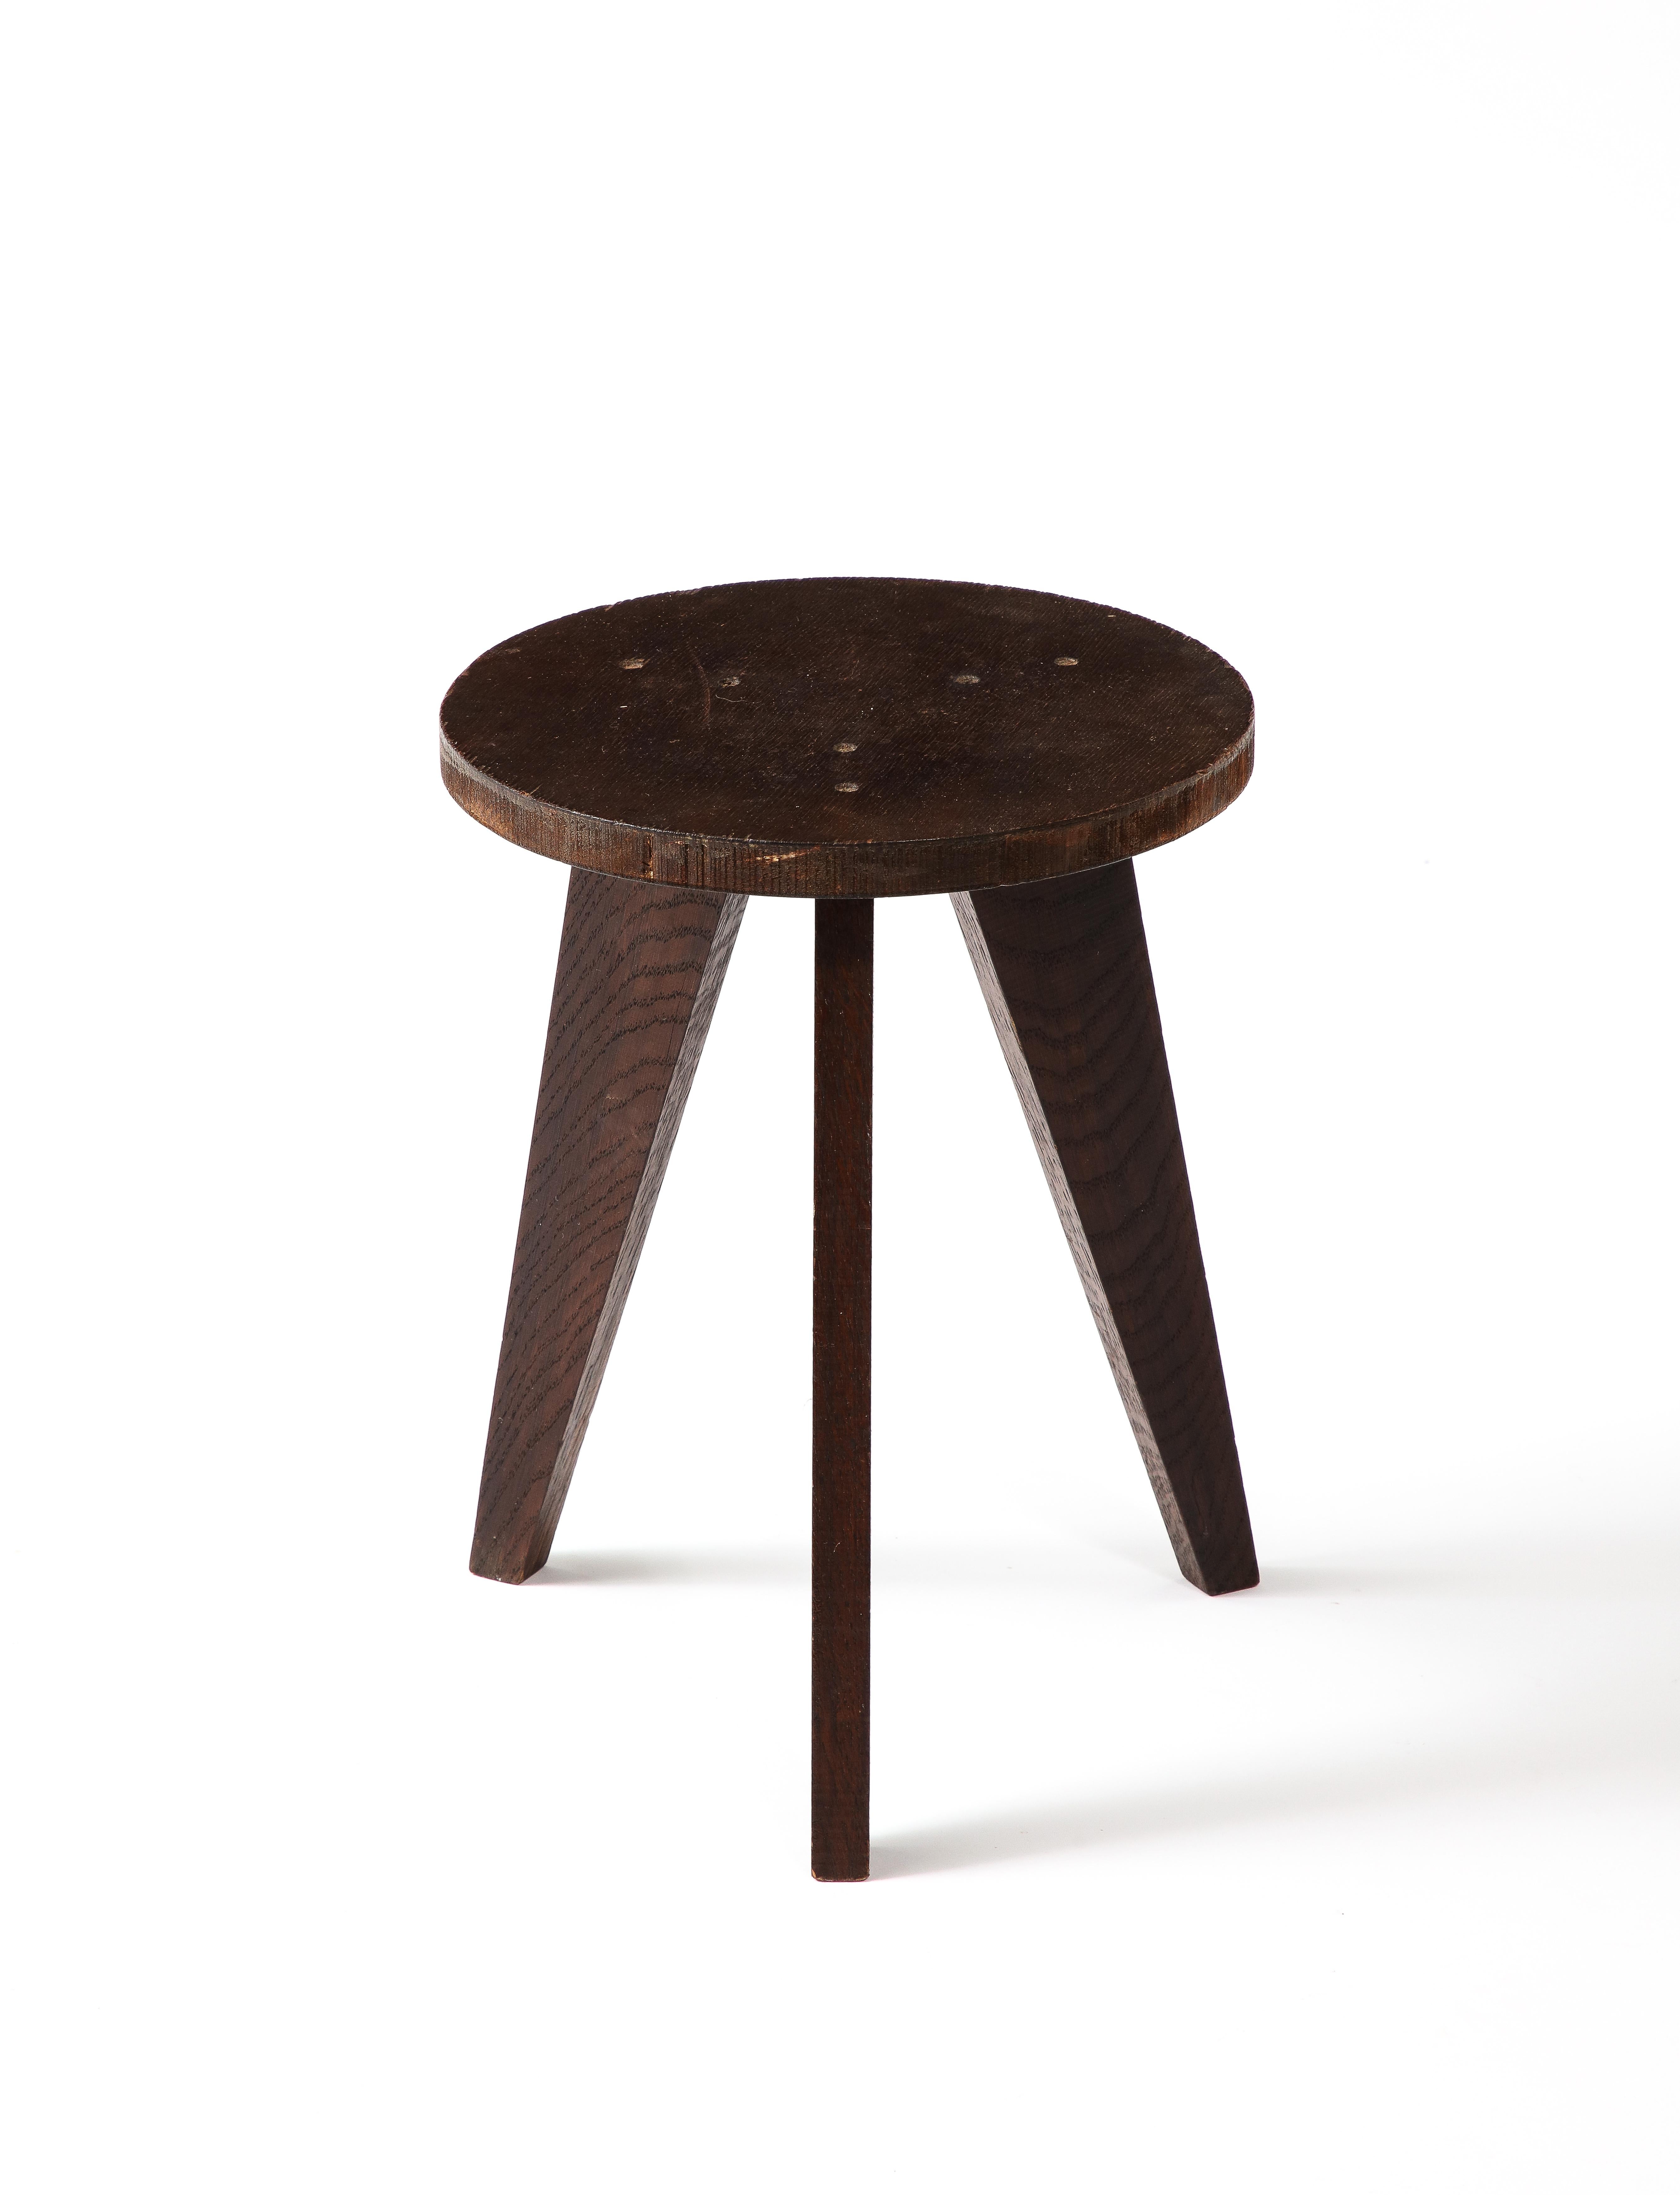 20th Century Dark Oak Stool in the Style of Hervé Bayley, France 1950s For Sale